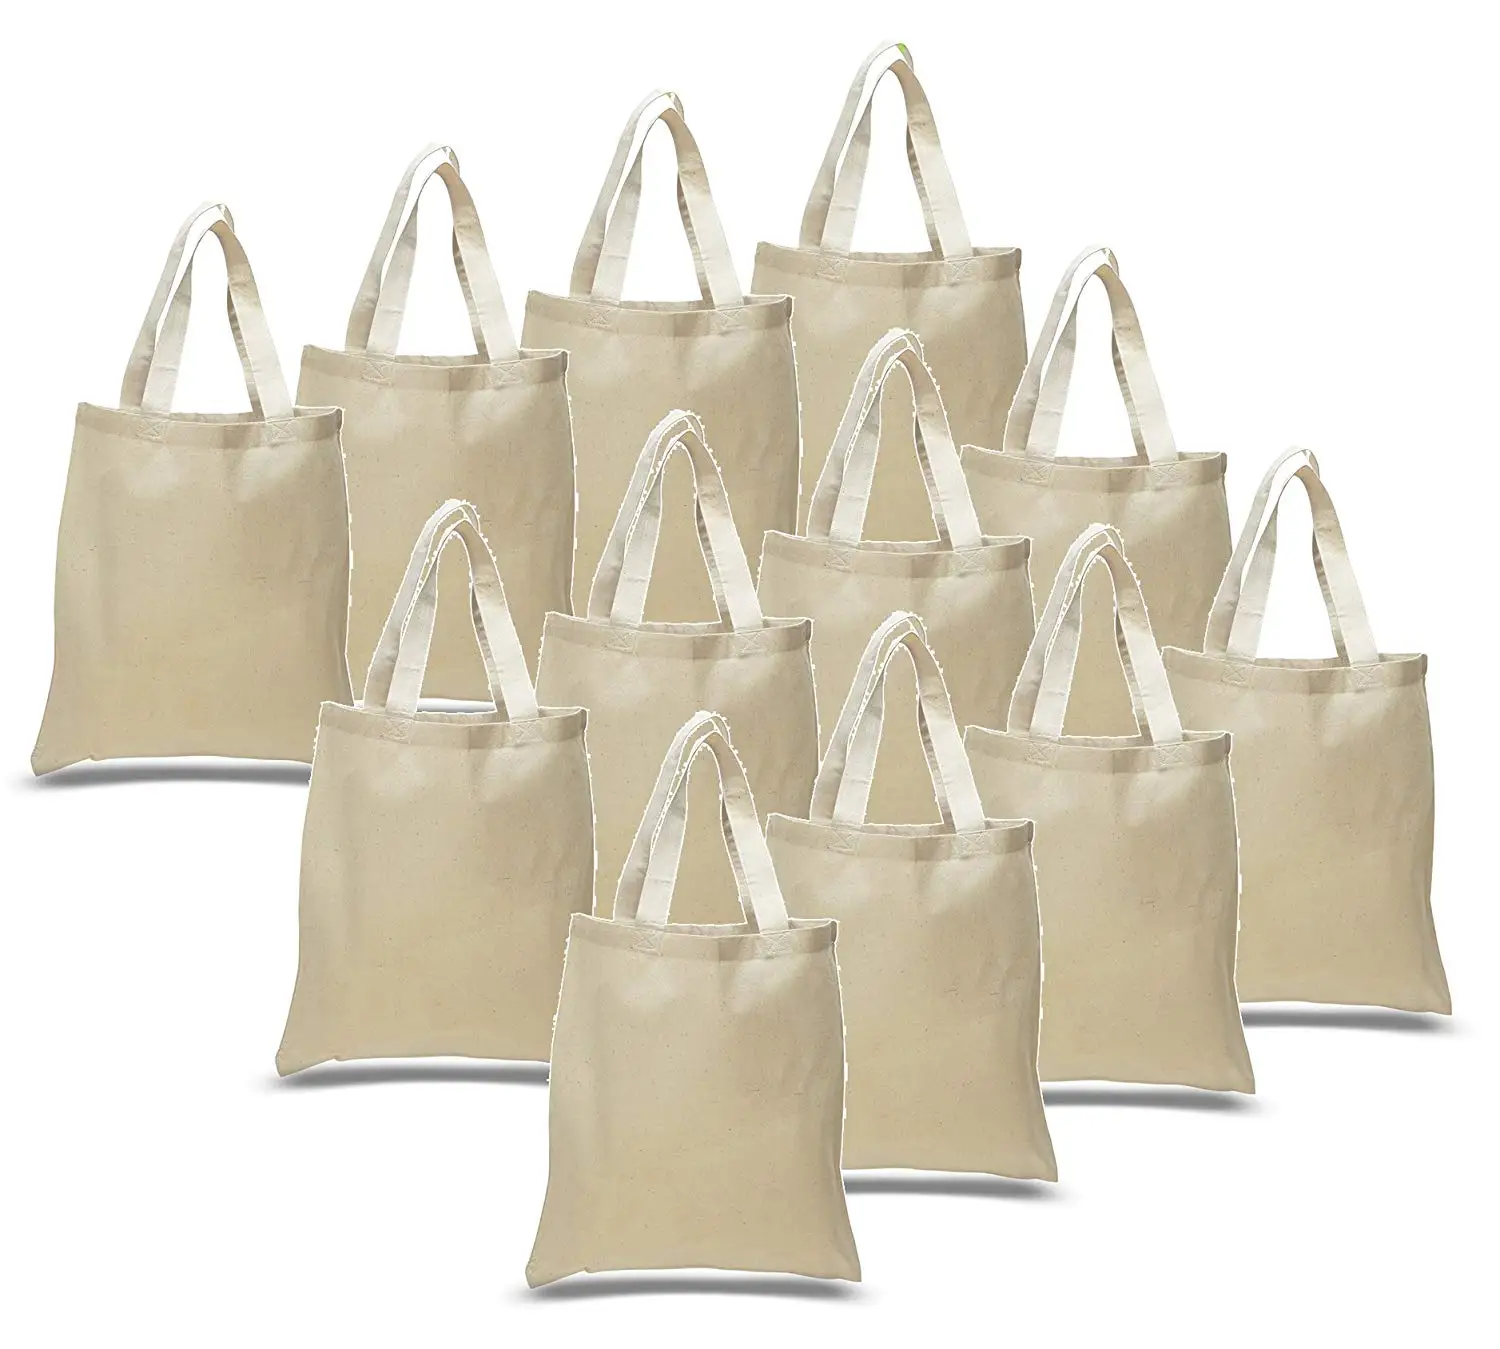 cloth bags online